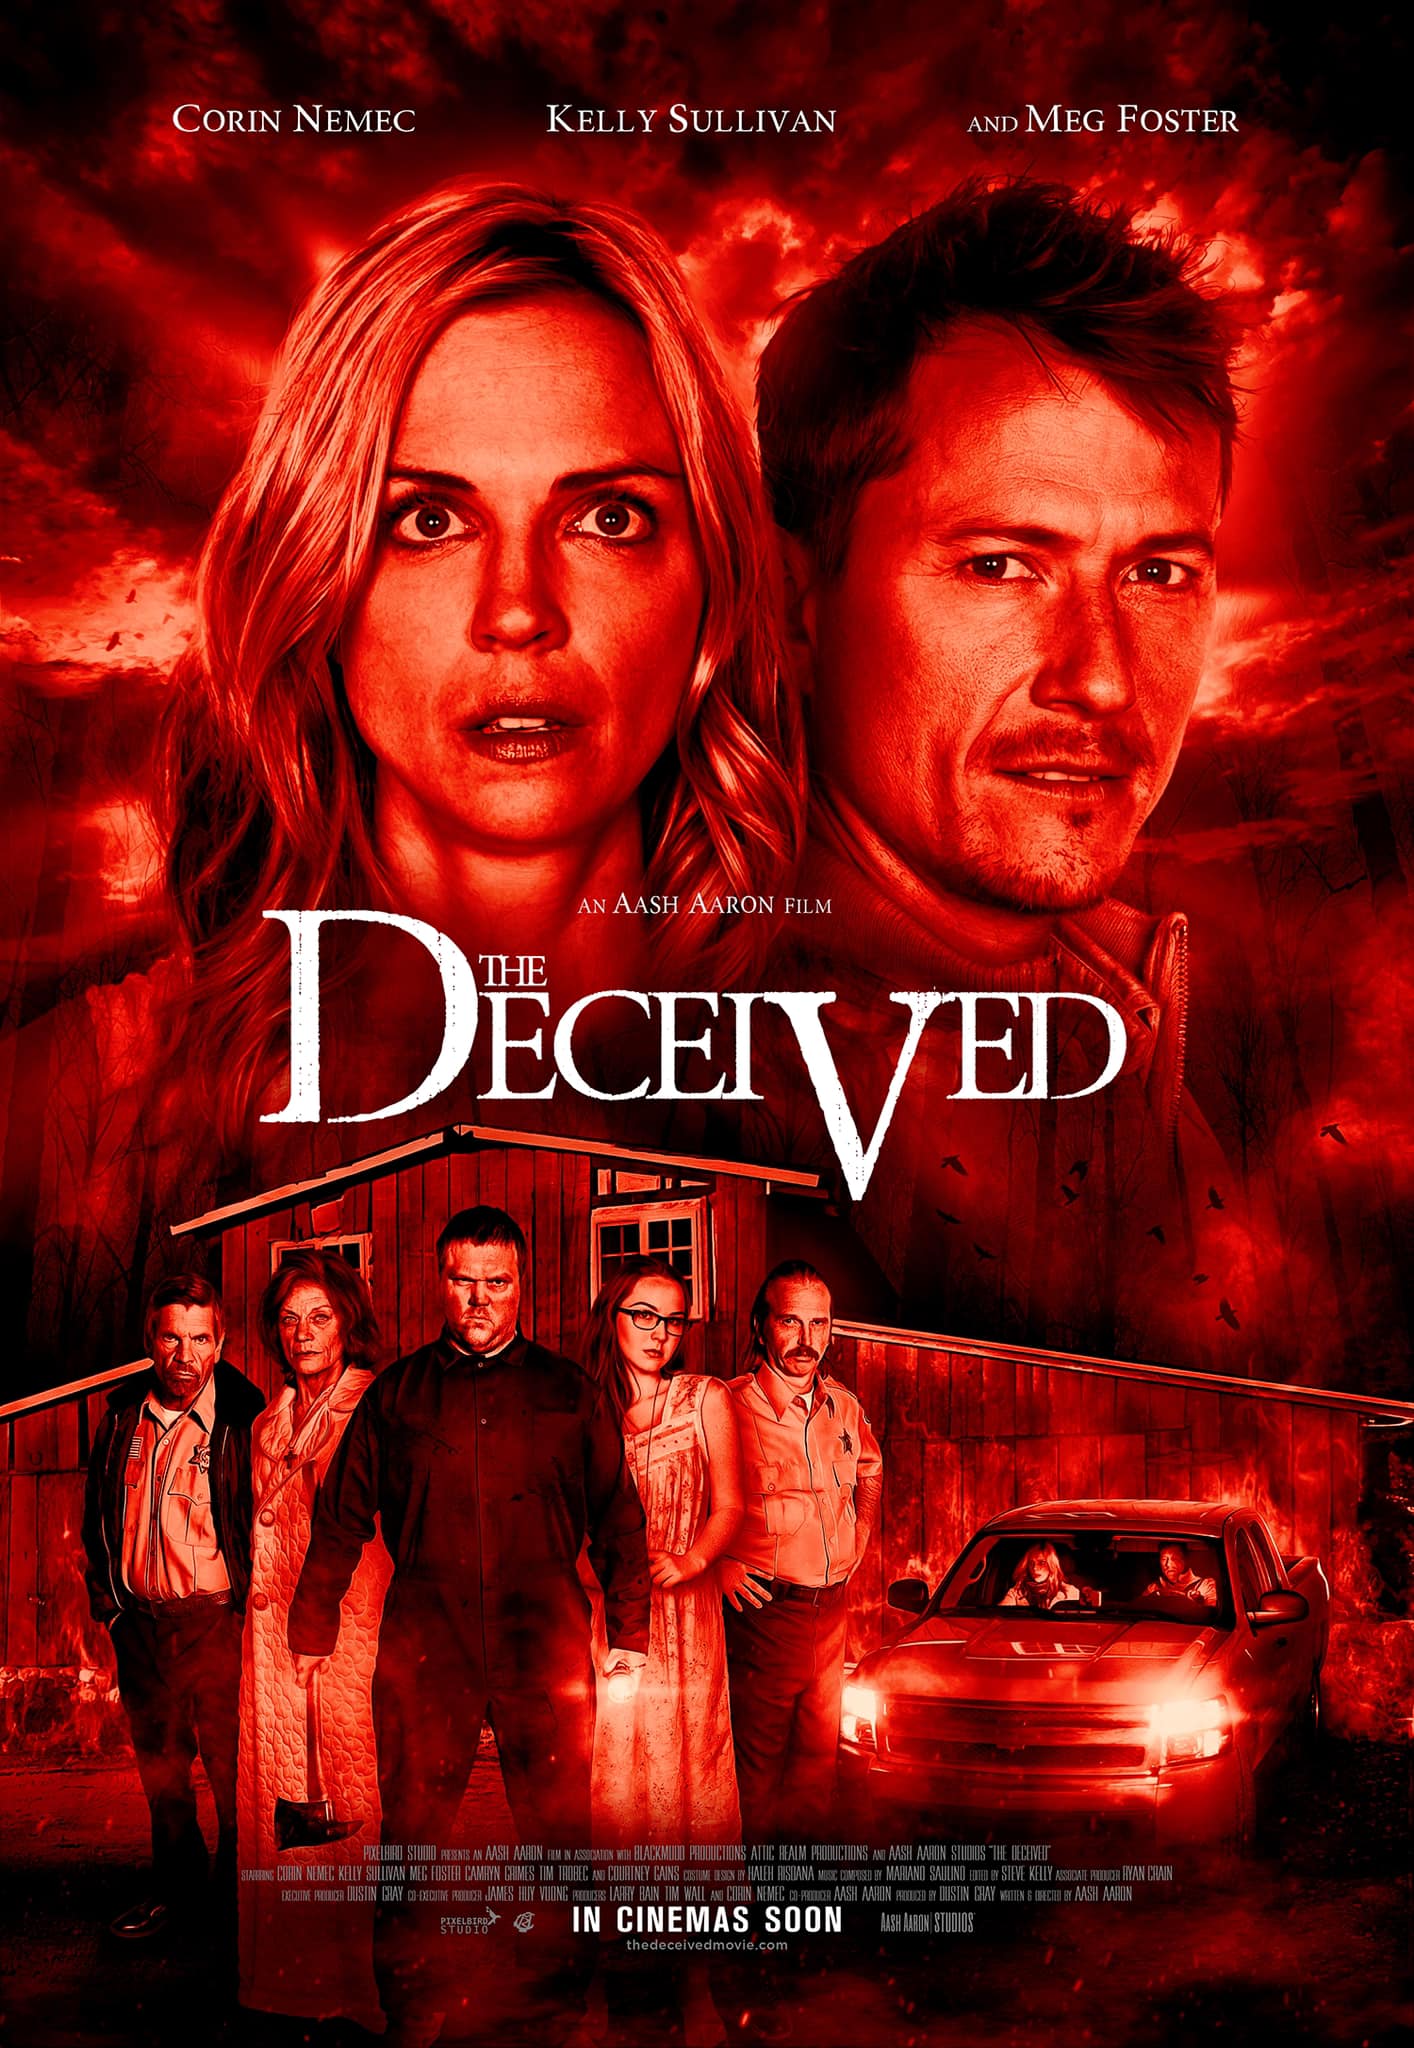 The Deceived Movie Poster